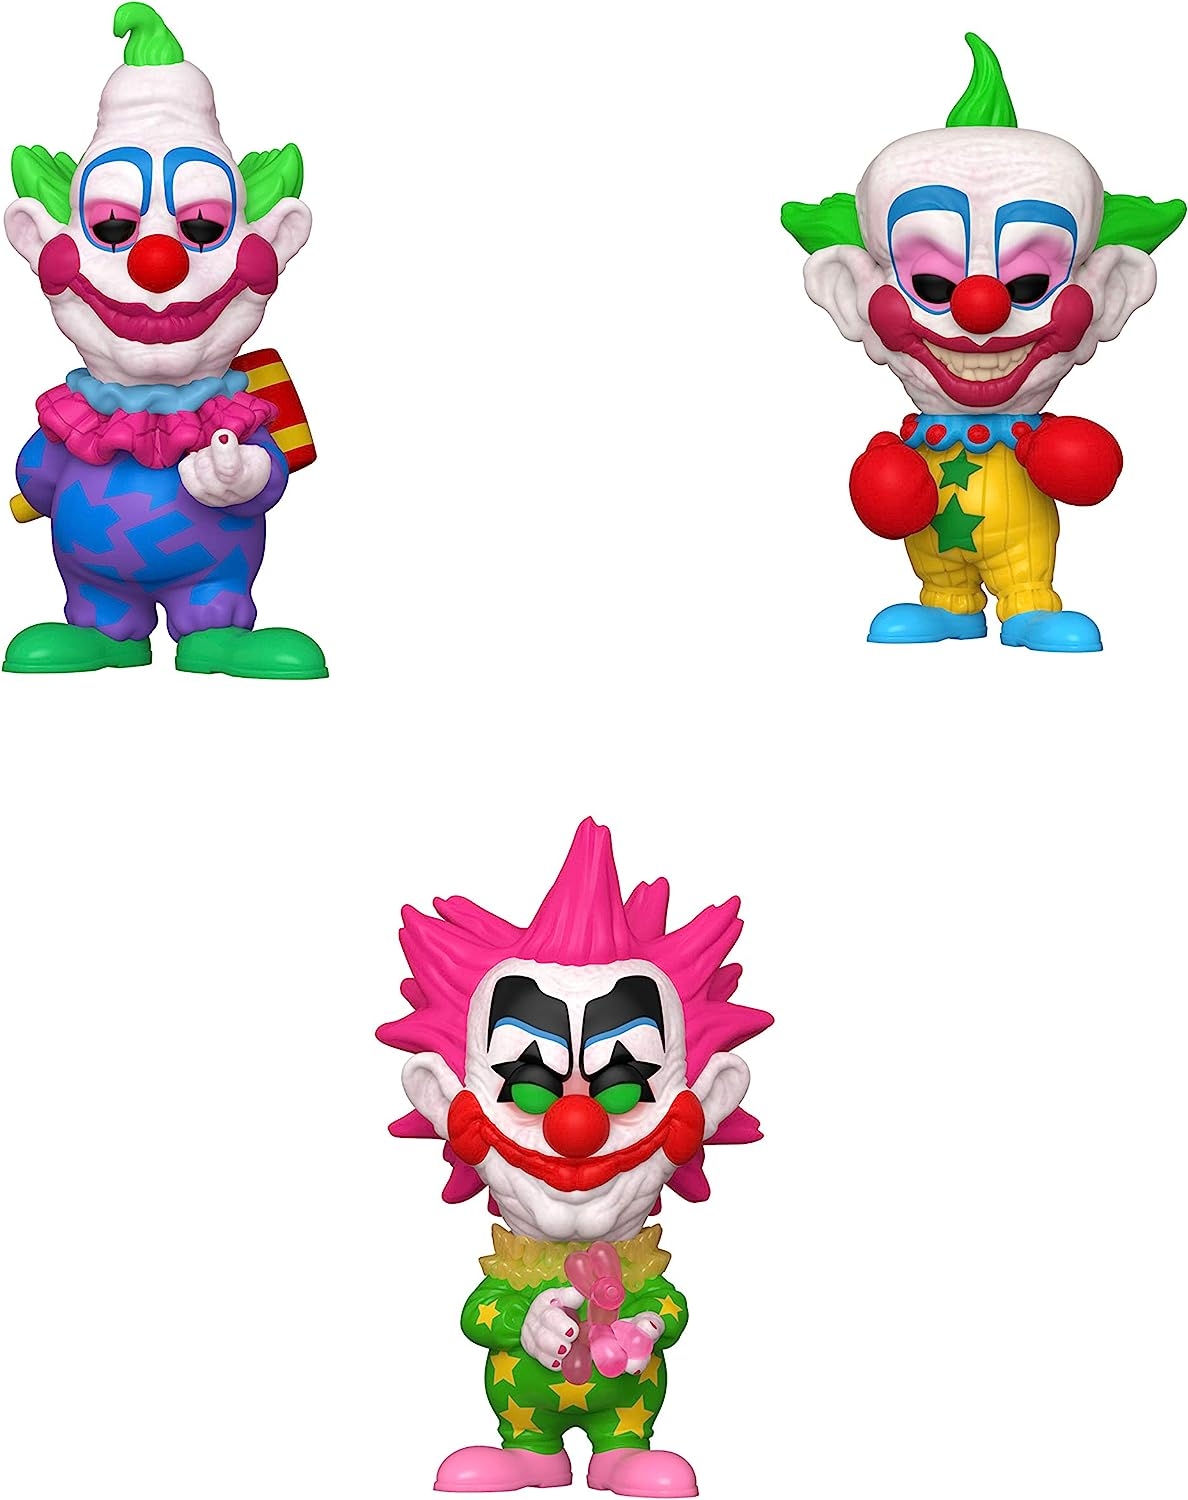 Funko Movies: POP! Killer Klowns from Outer Space Collectors Set – Jumbo, Shorty, Spikey, 3.75 inches   price checker   price